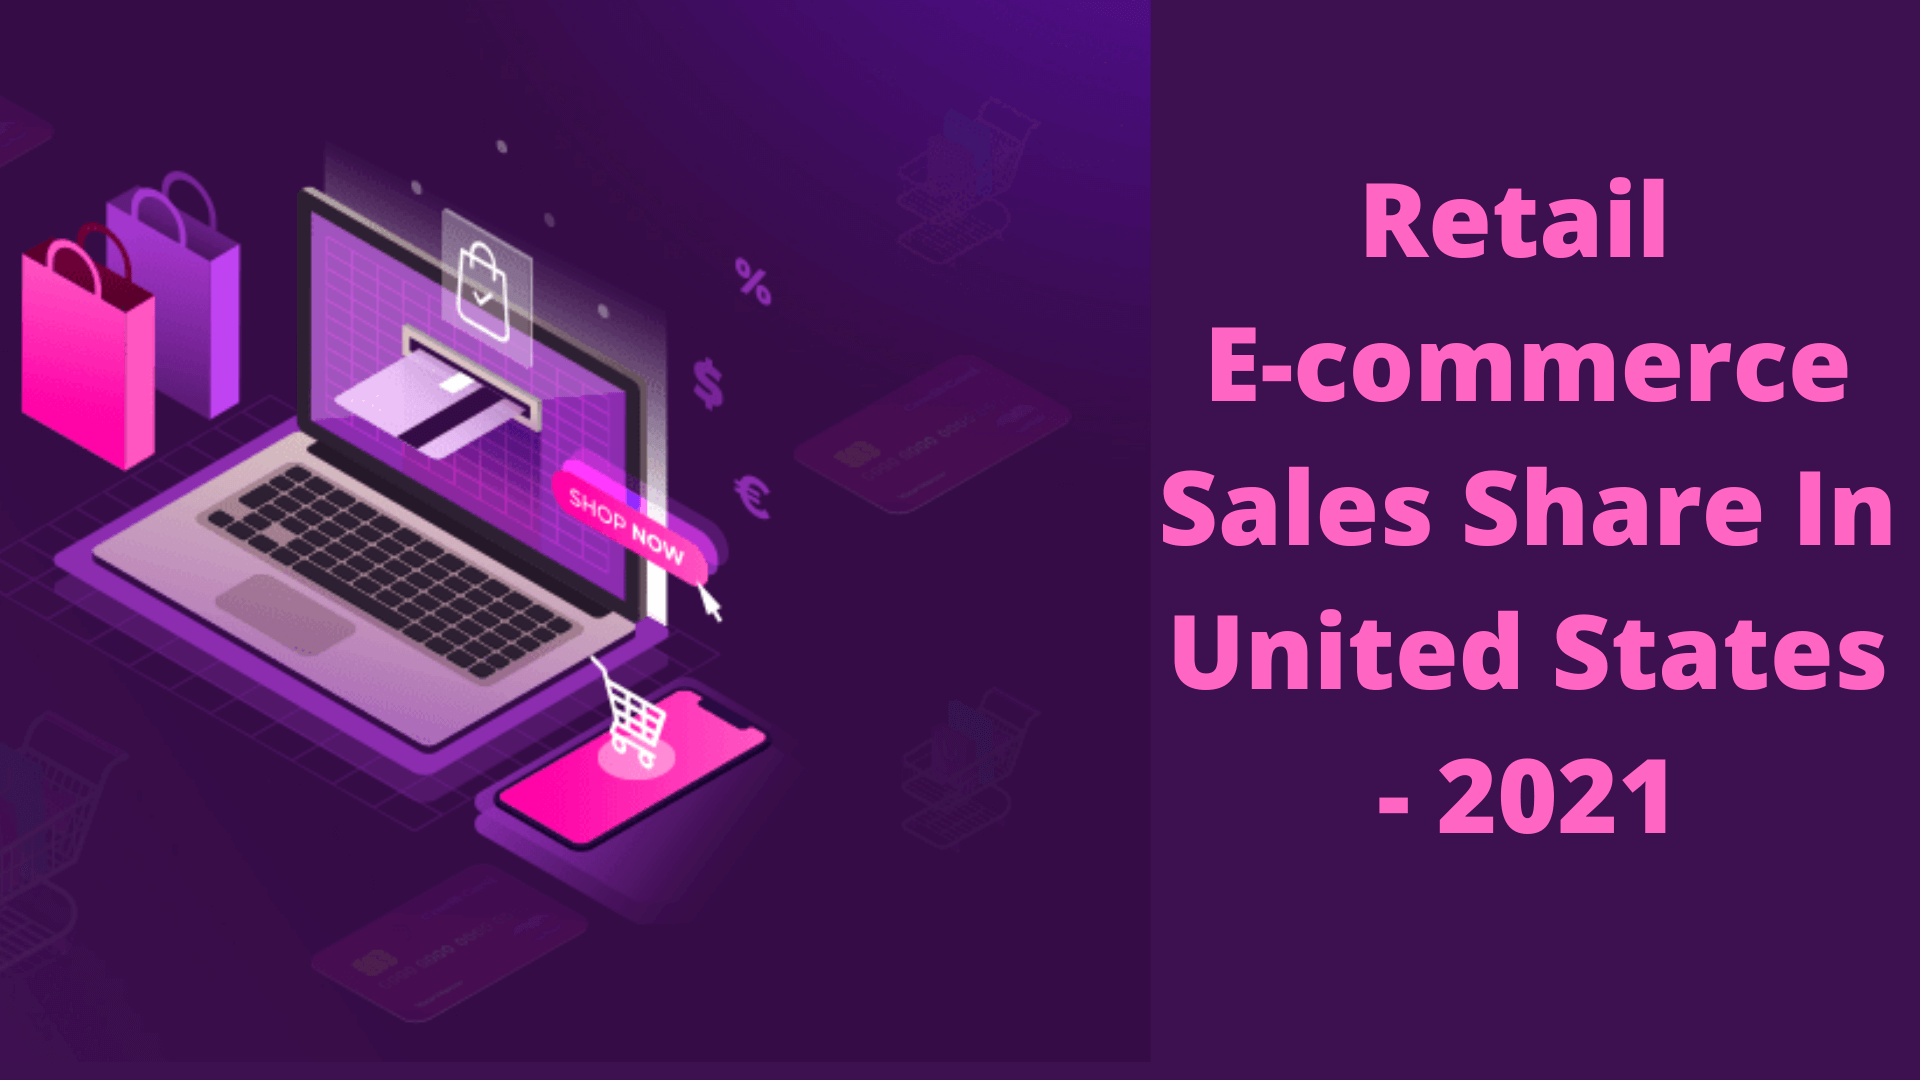 Retail E-commerce Sales Share In United States (1)